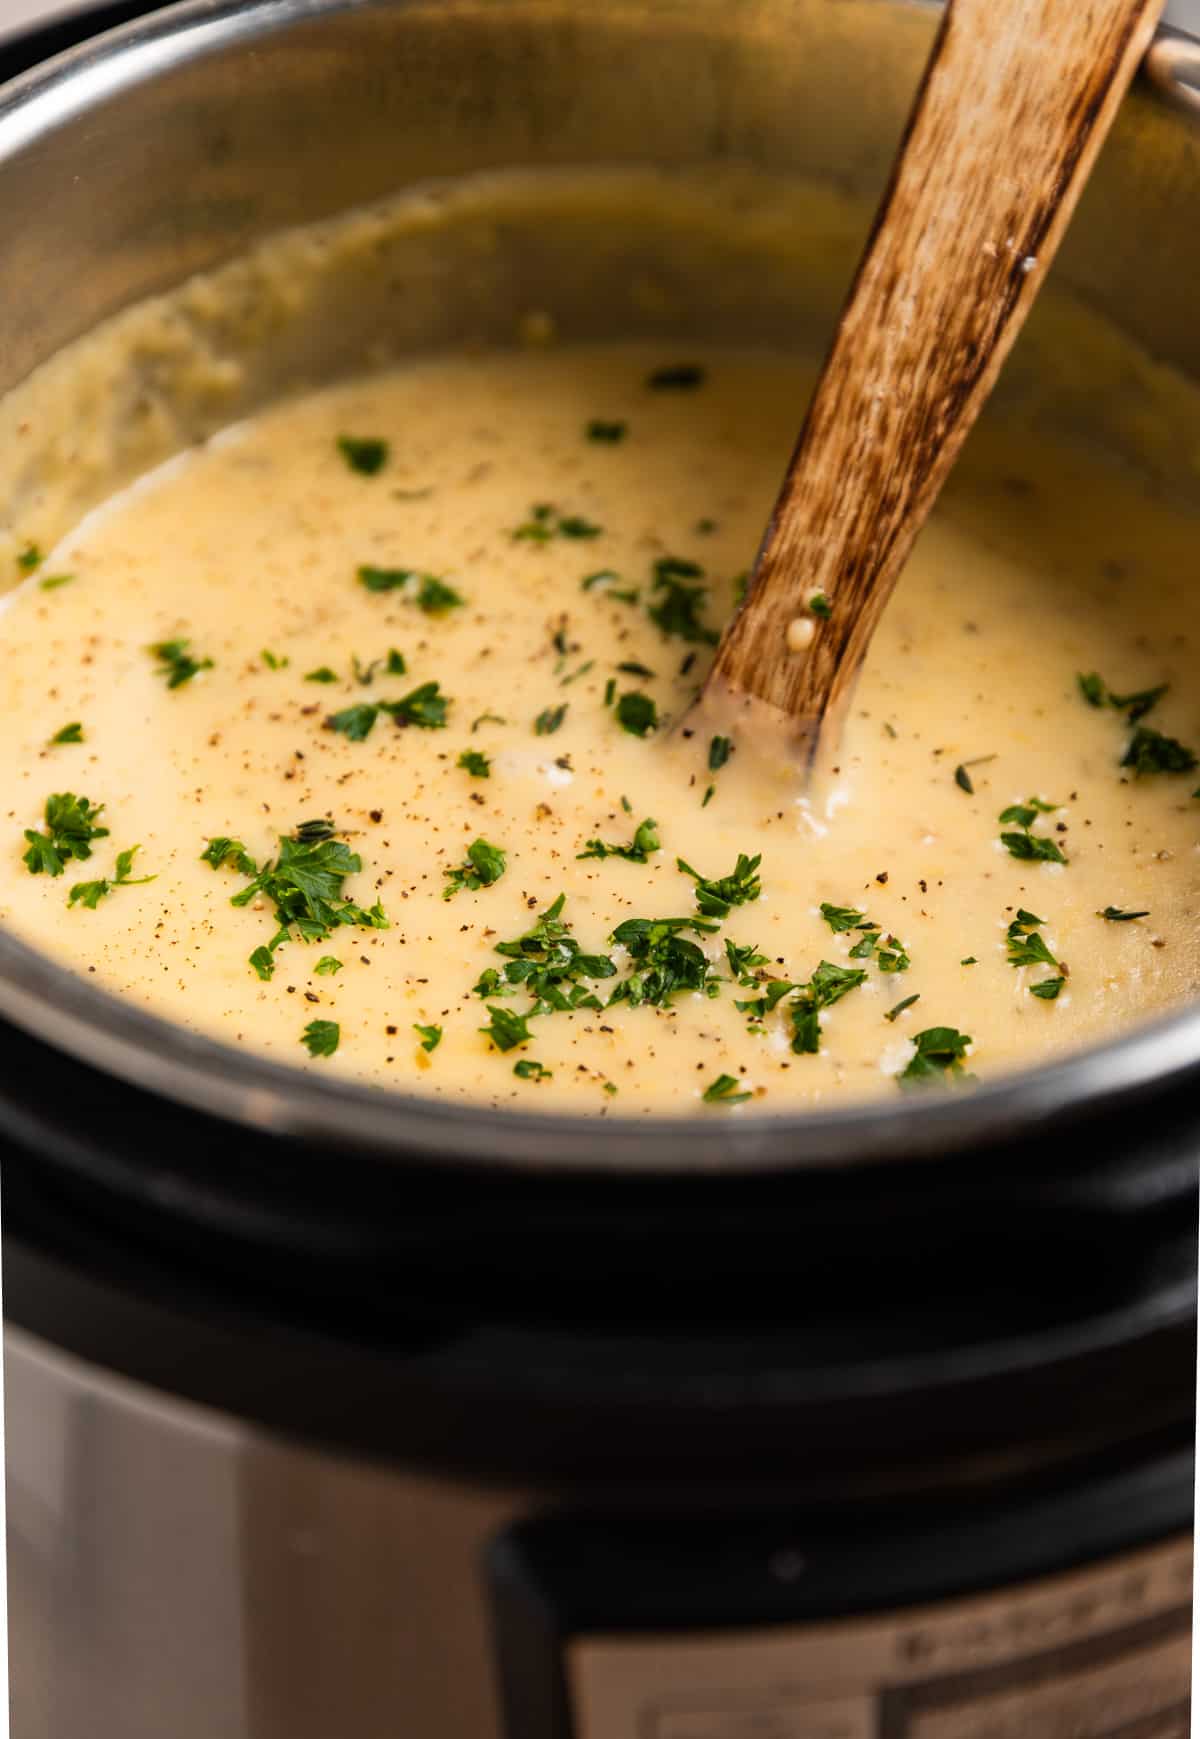 Instant pot with soup topped with chopped parsley and wooden spoon inserted.